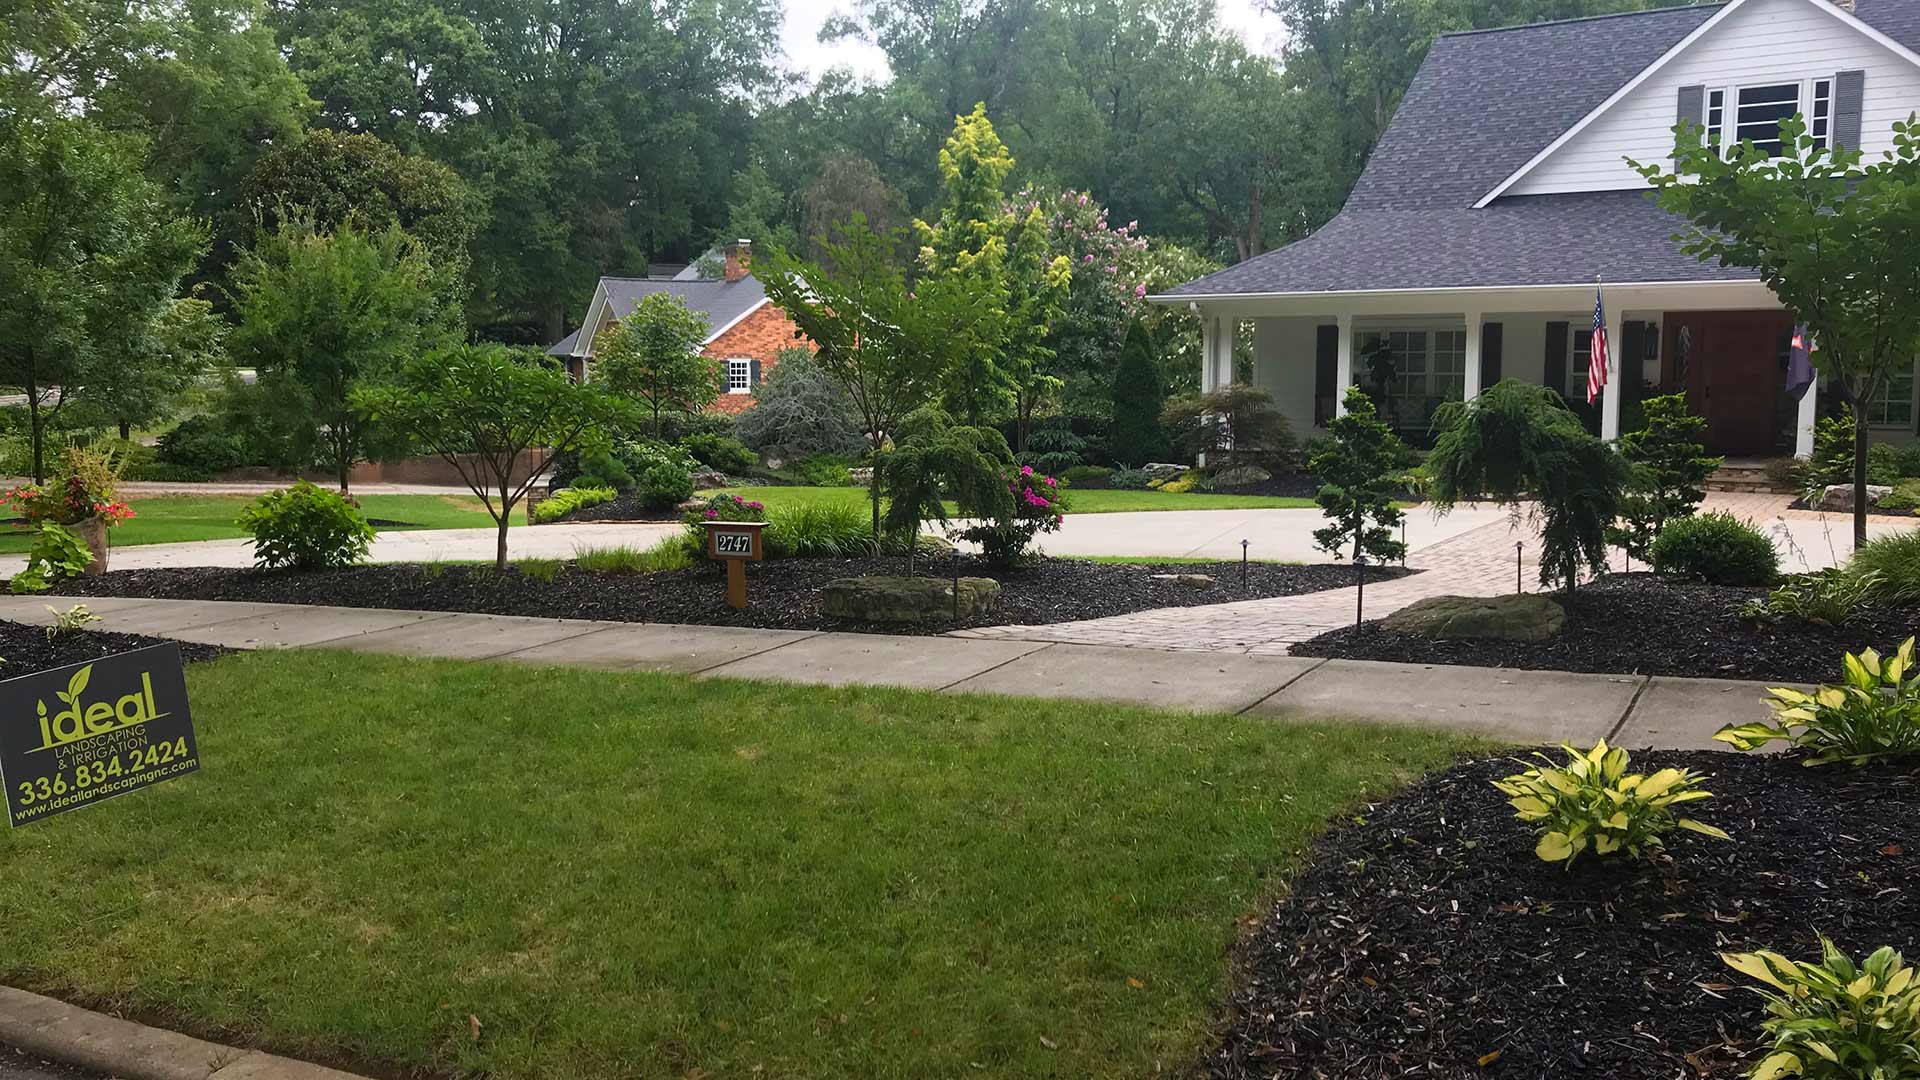 Large yard with fresh mulch installation and trimmed landscape trees in Summerfield, NC.